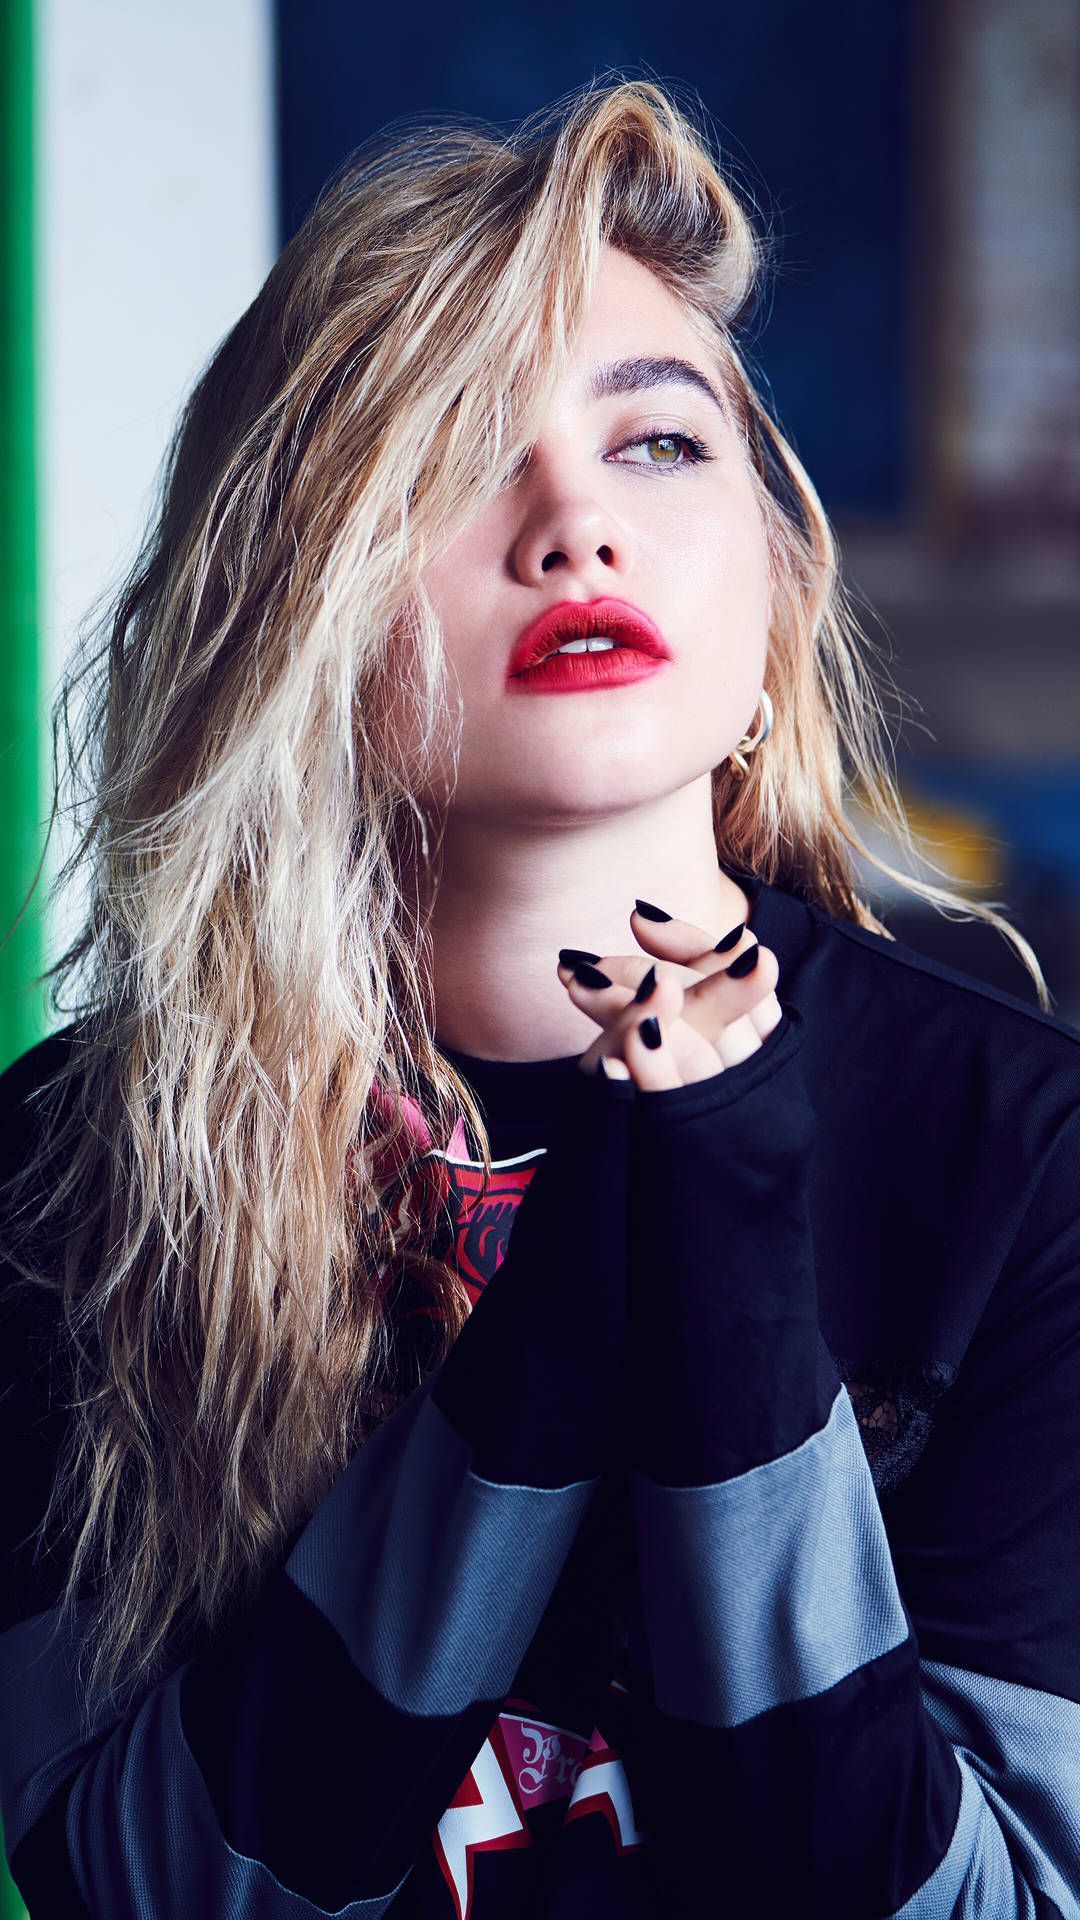 1440x2560 wallpaper of singer, musician, songwriter, actress, and model, Halsey - Florence Pugh